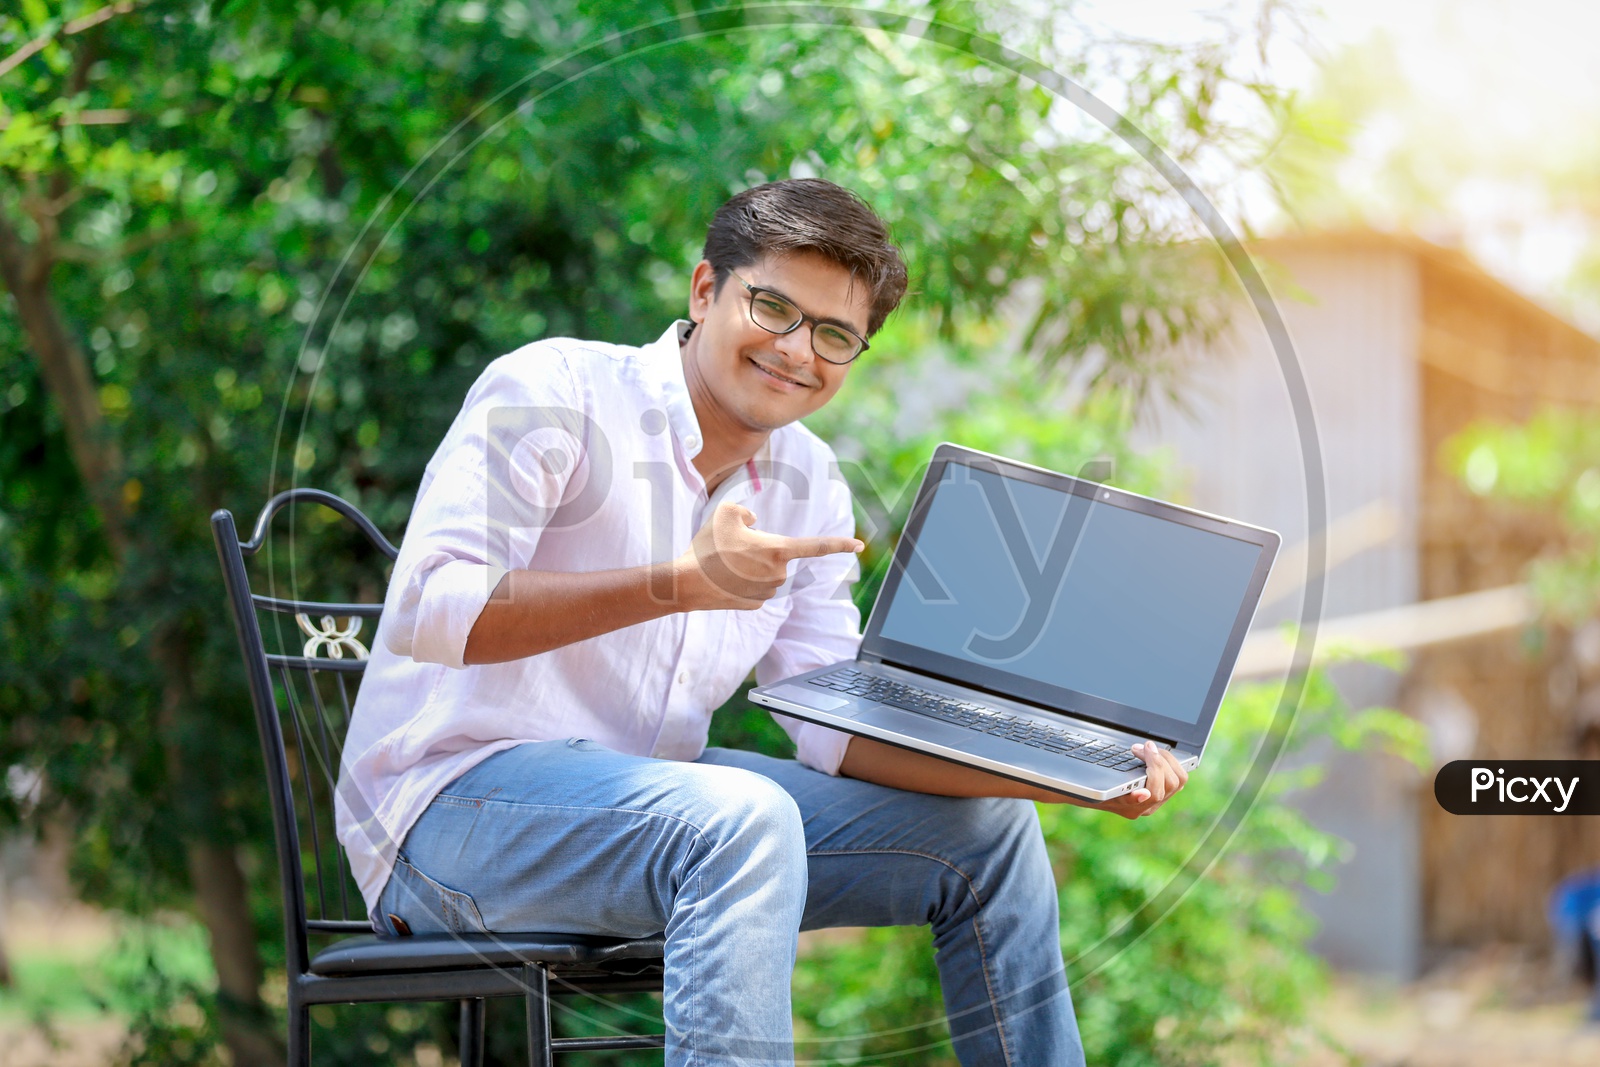 Indian College Student using Laptop with smiling face.